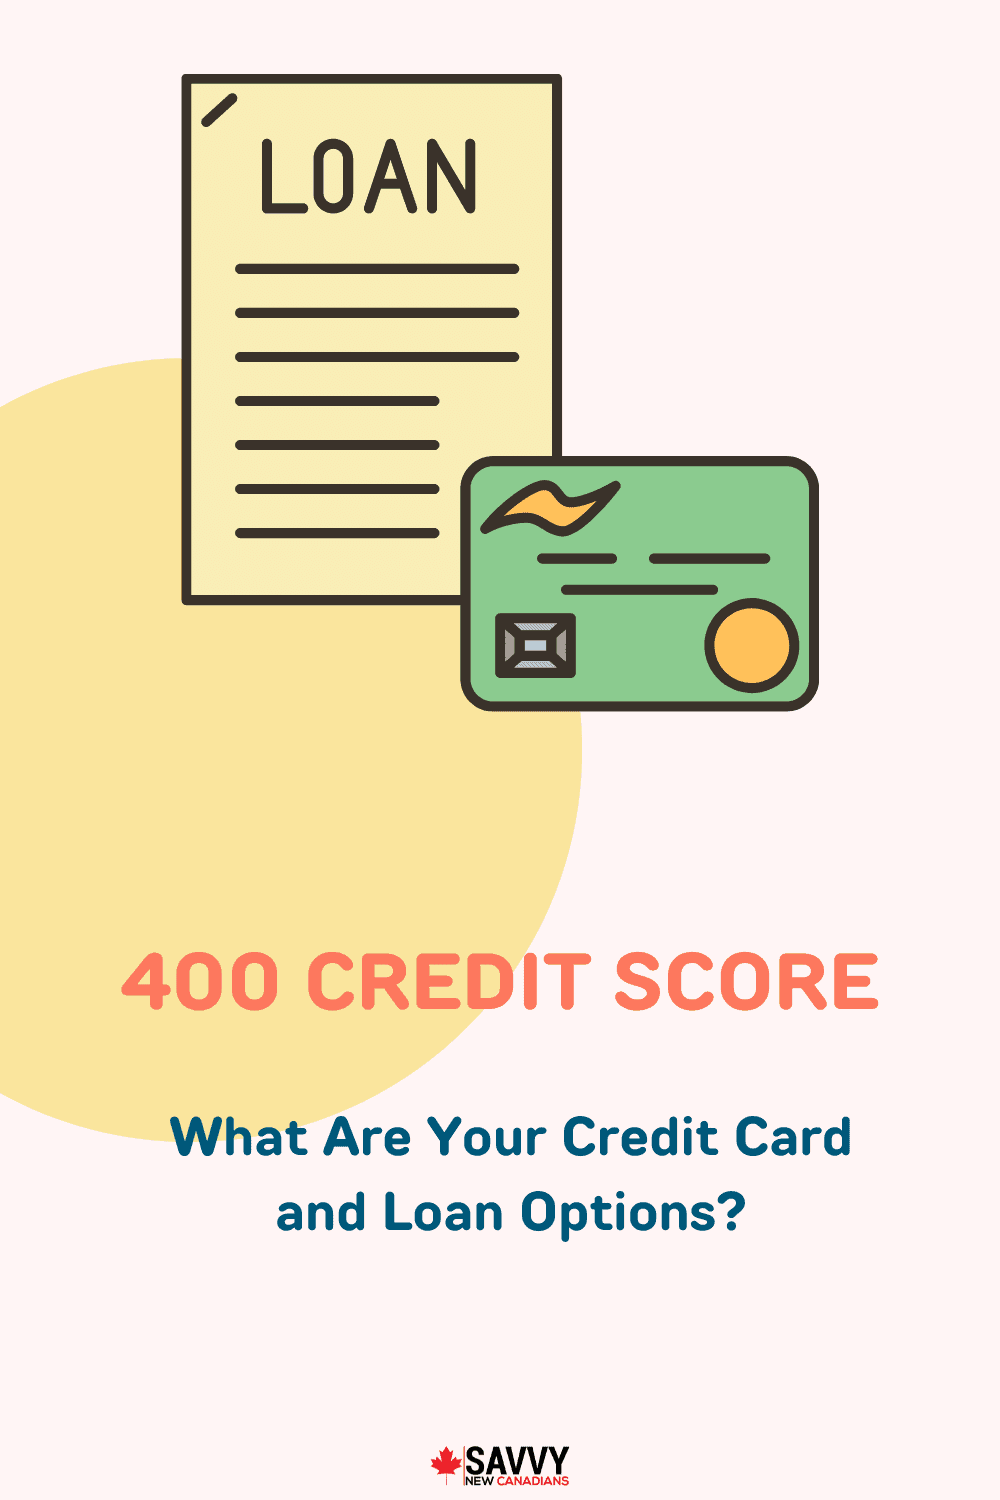 400 Credit Score: What Are Your Credit Card and Loan Options?